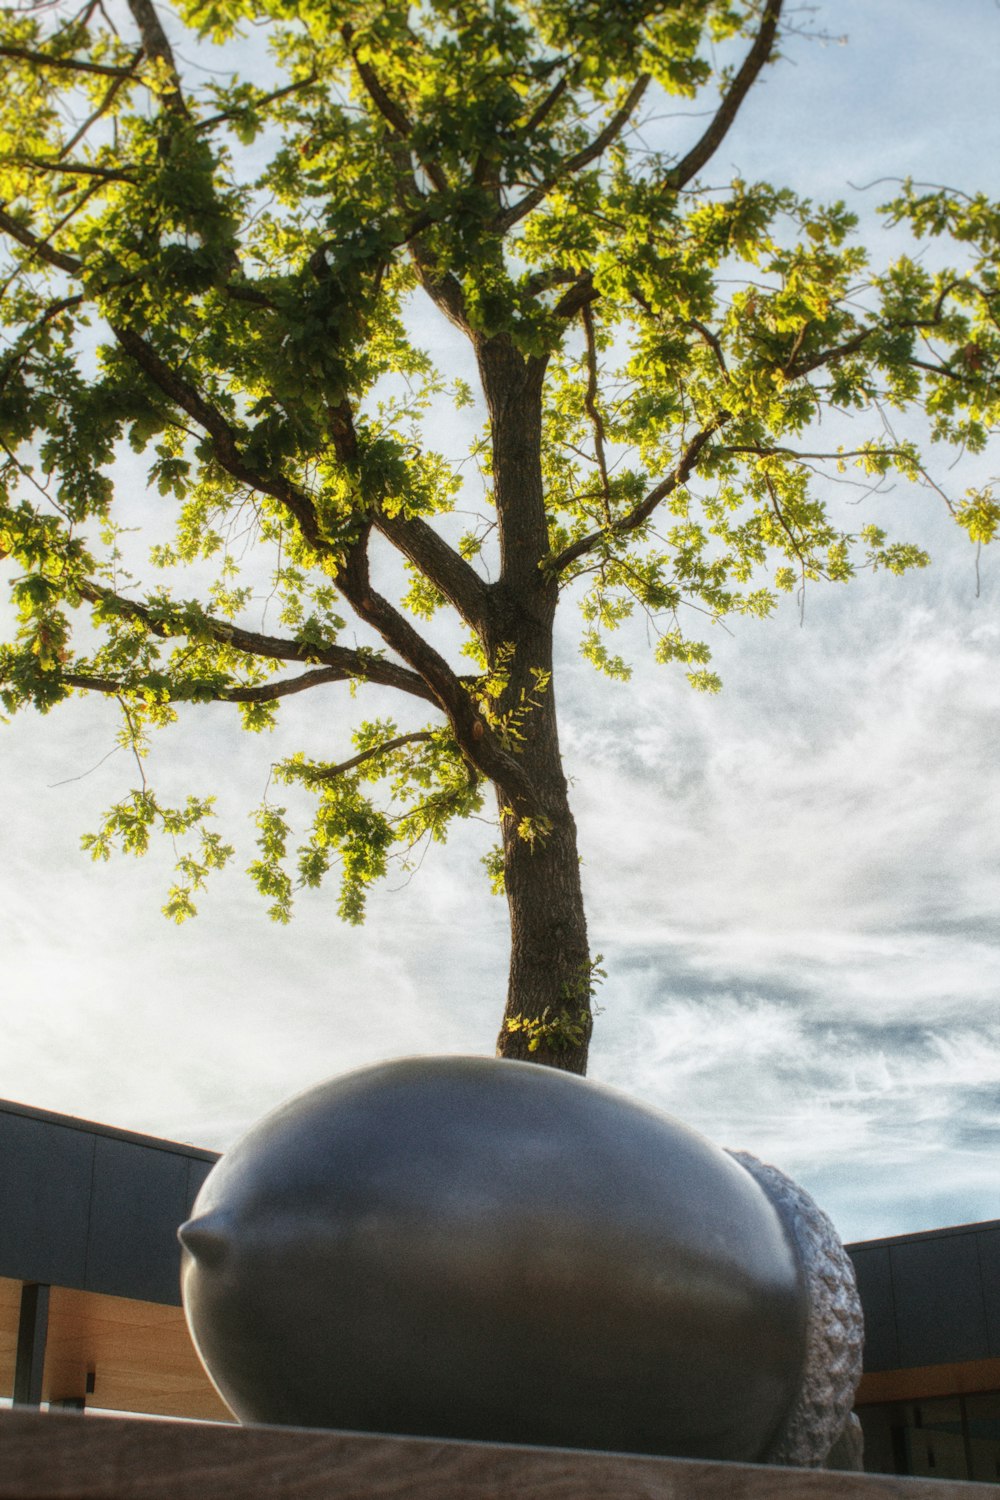 a large metal ball sitting next to a tree